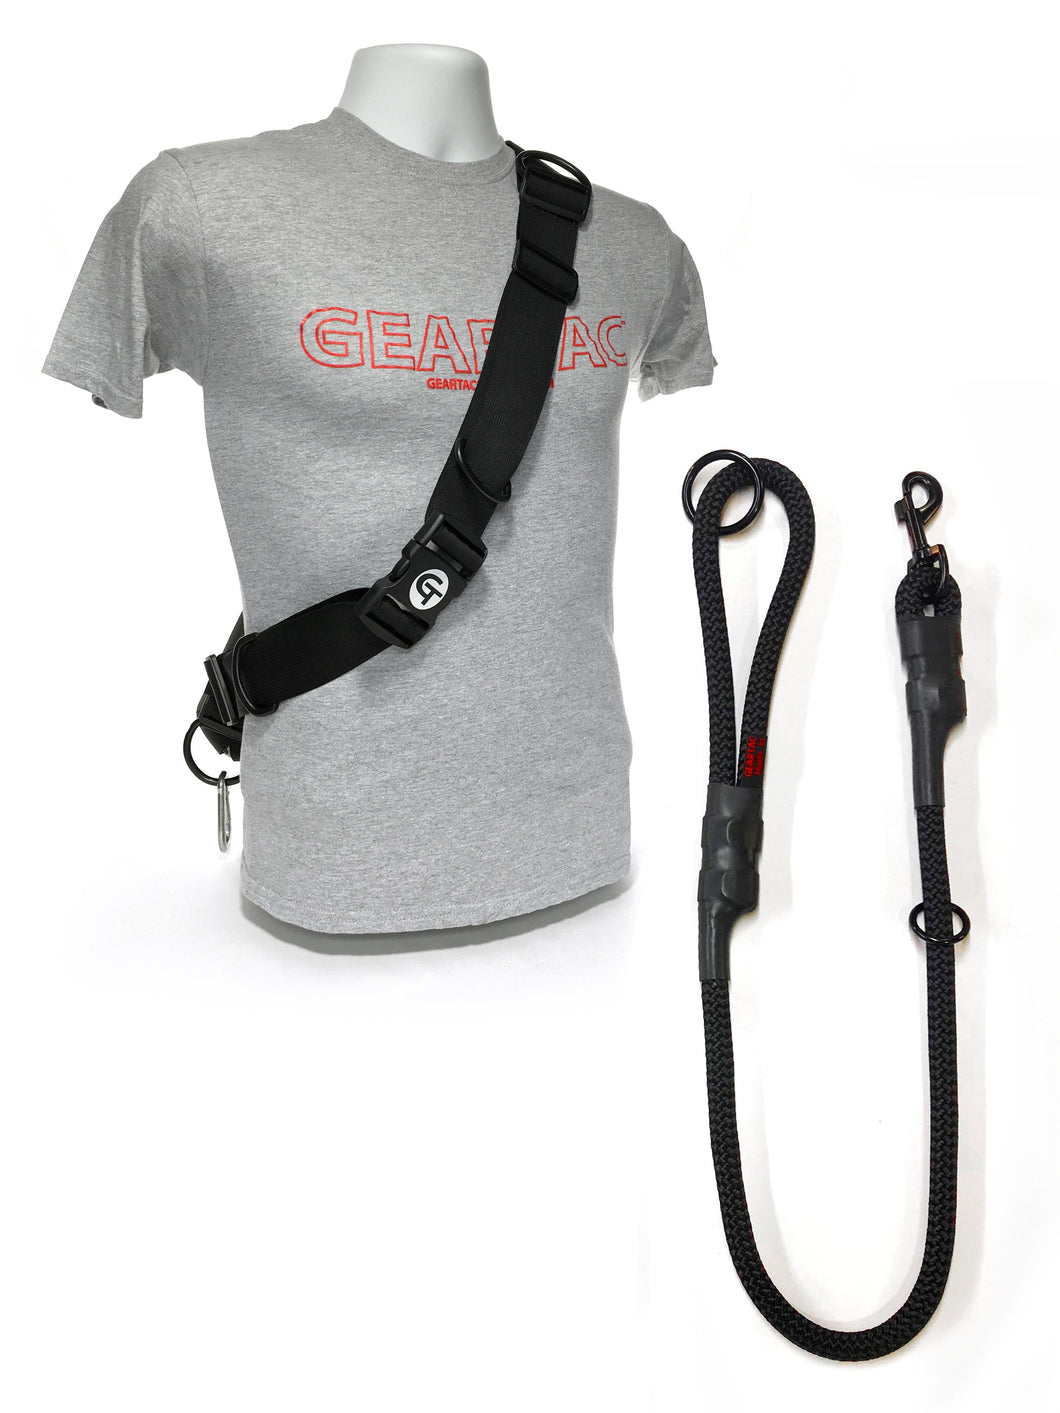 gearleash II for the person who wants a super heavy duty rope dog leash